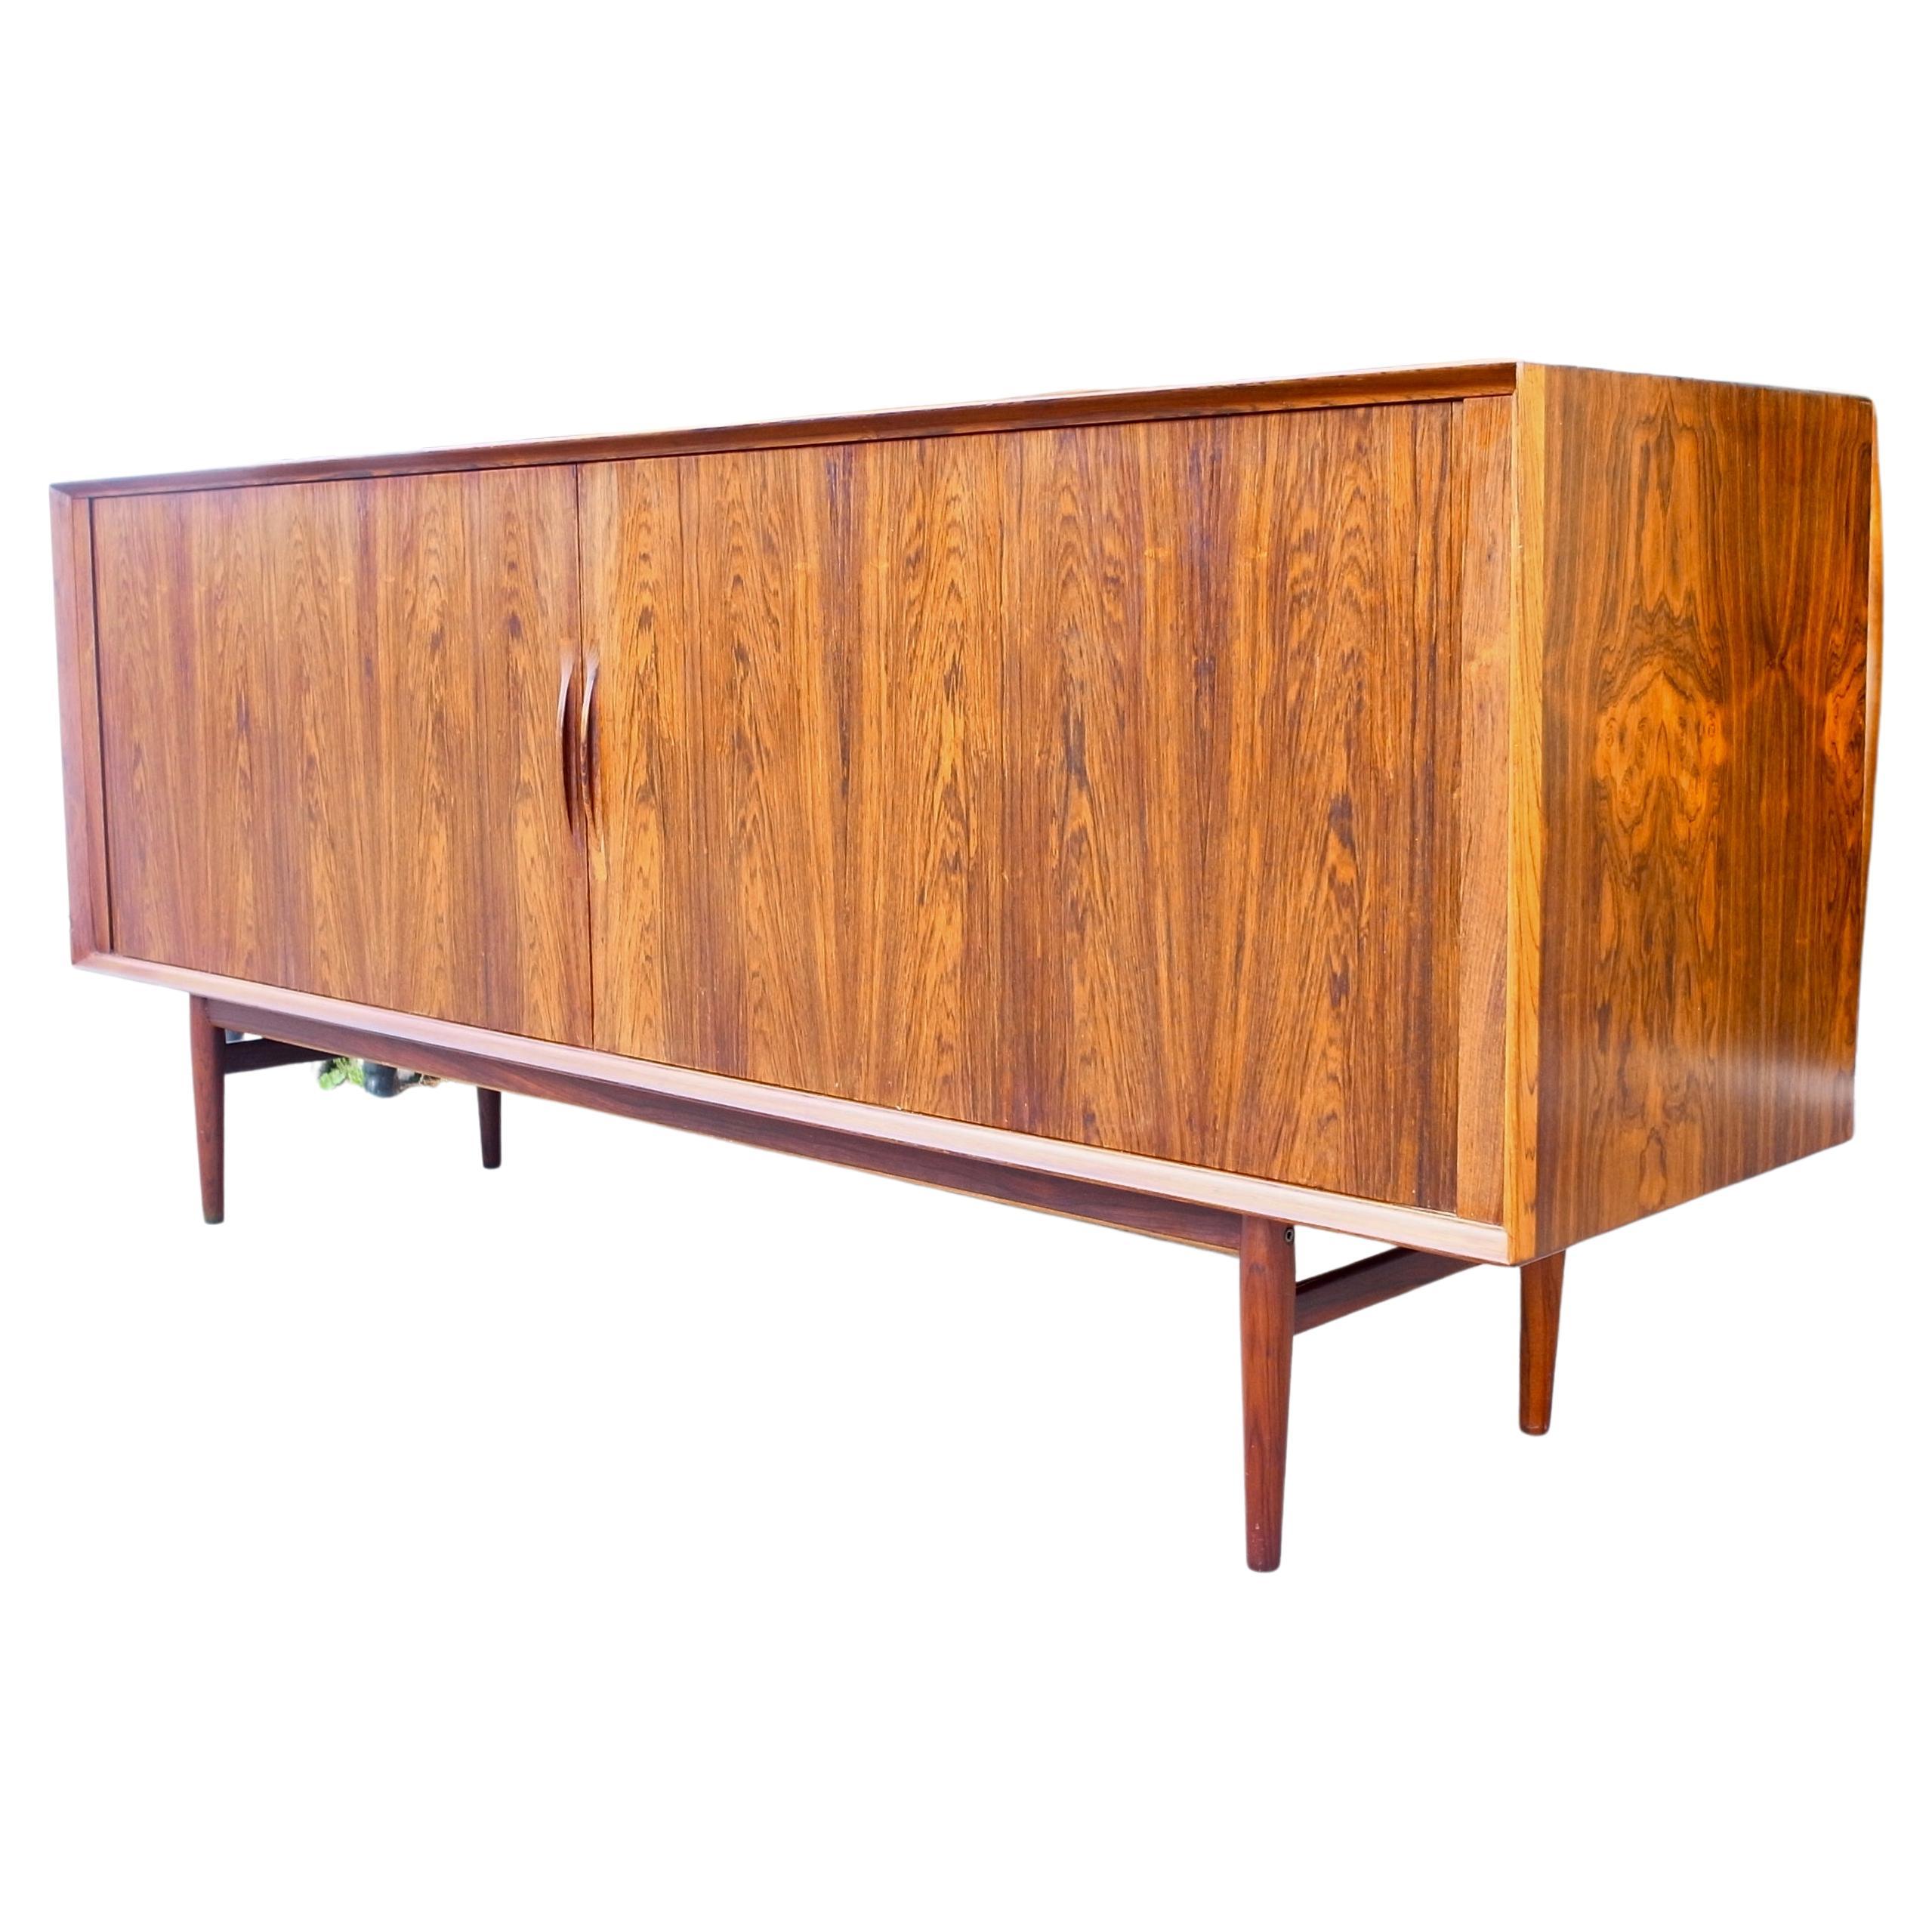 1960s Tambour Fronted Rosewood Sideboard by Arne Vodder for Sibast For Sale